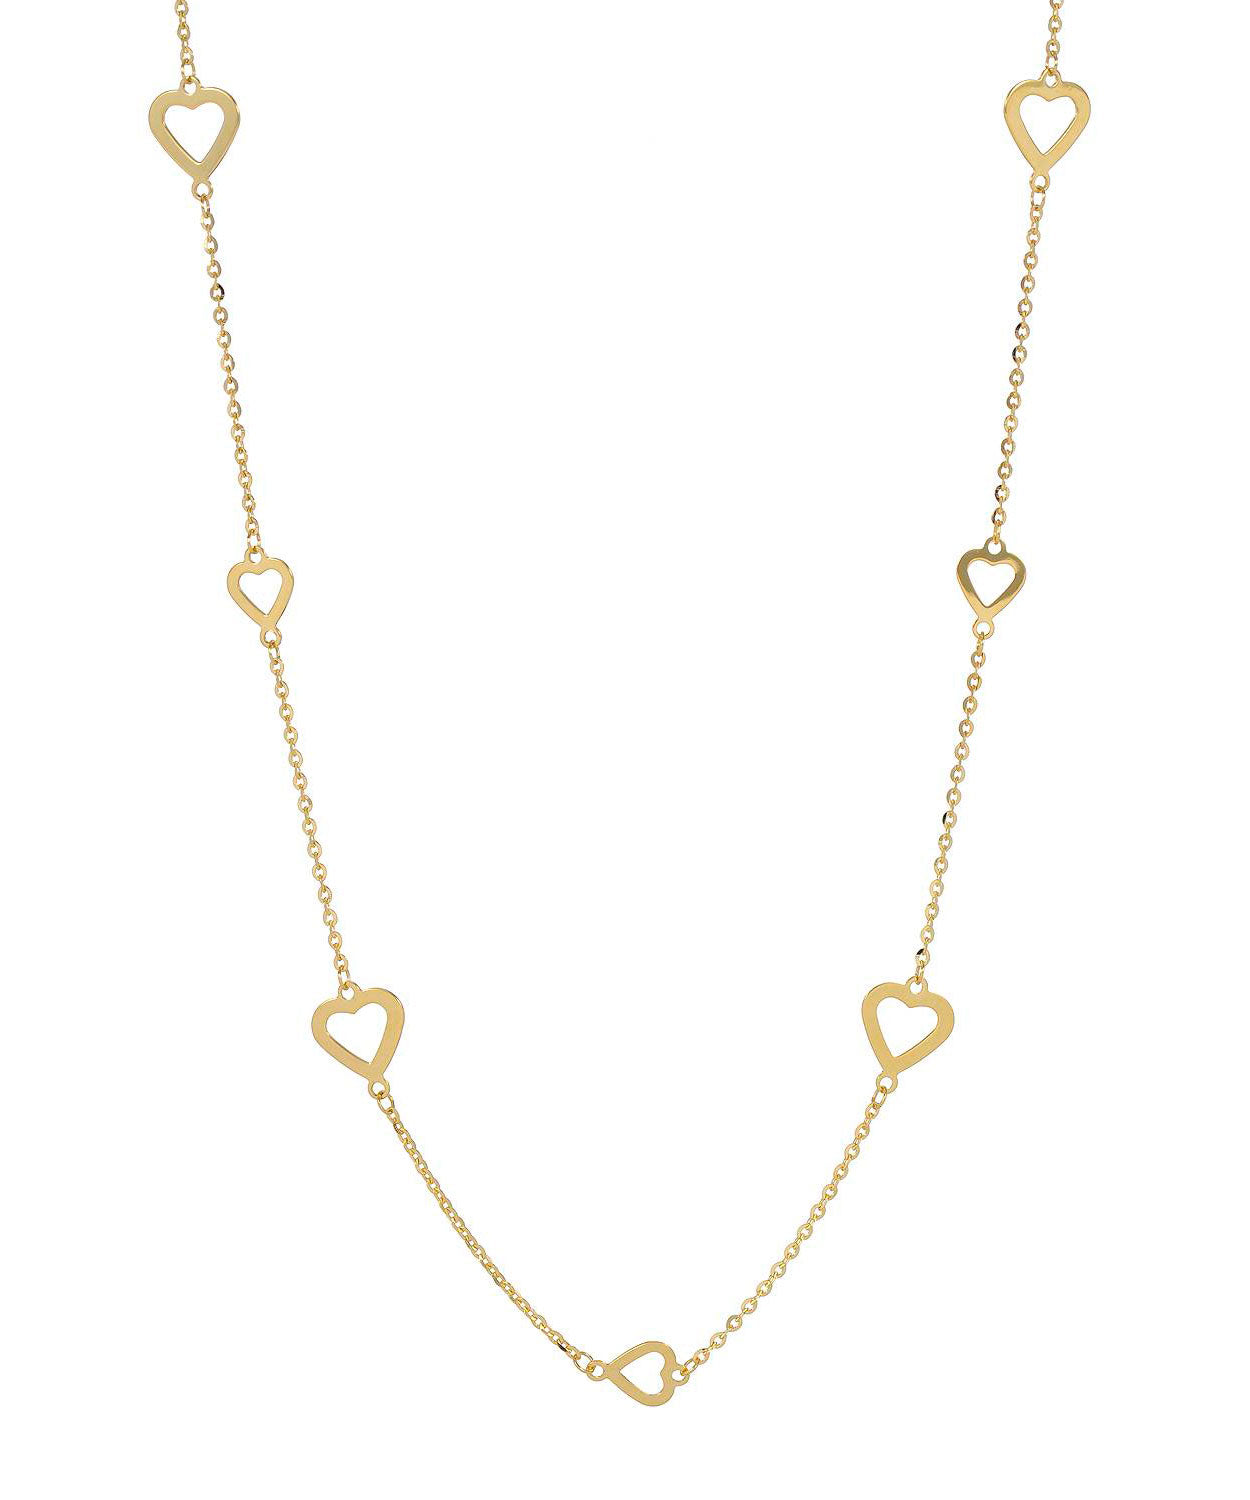 14k Gold Heart Necklace - Made in Italy View 1